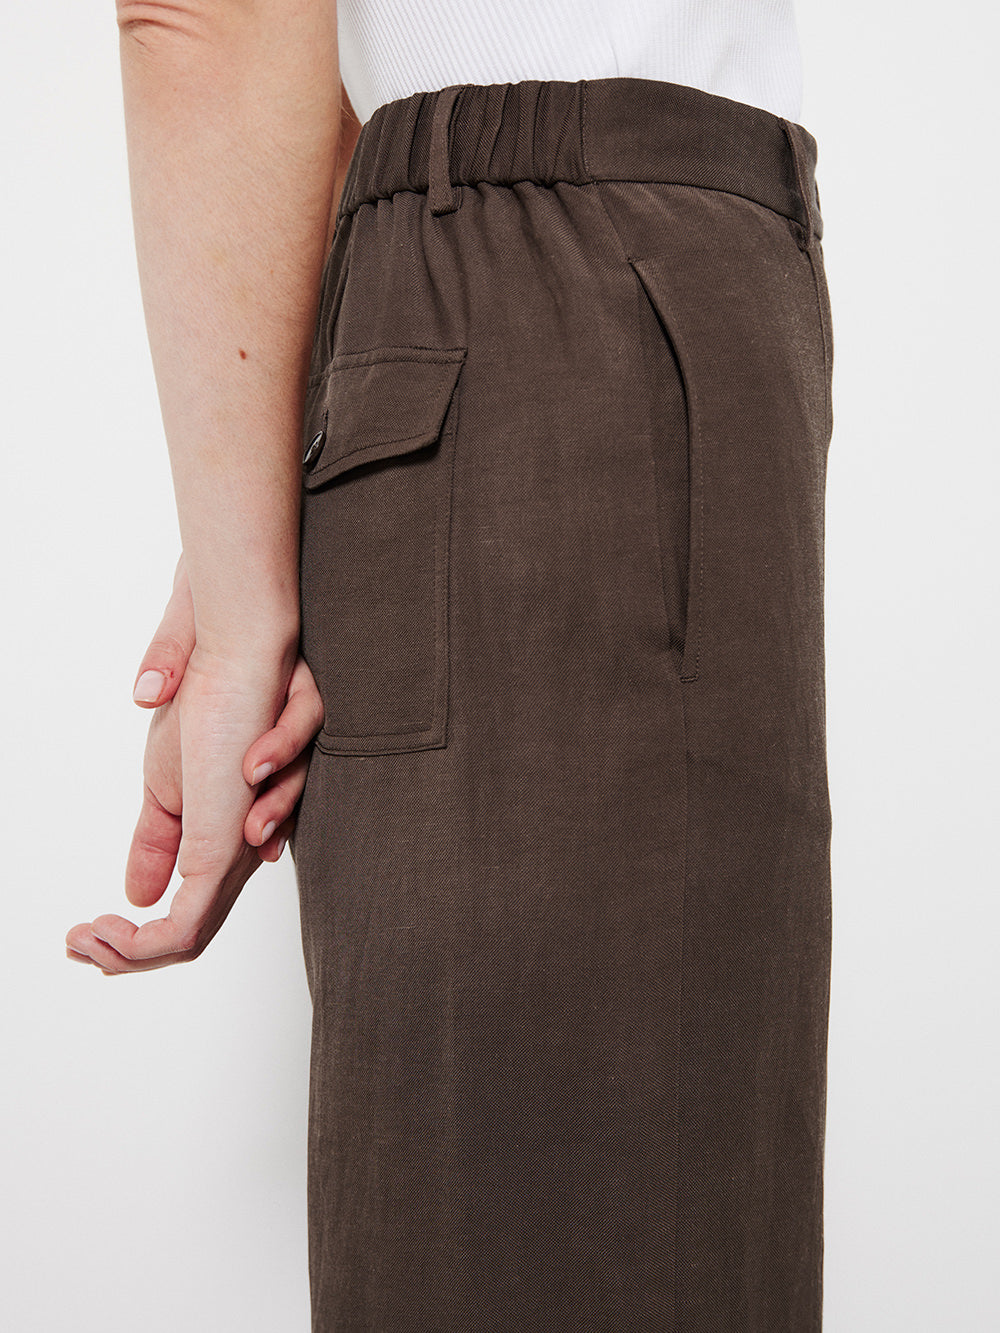 The Casual Utility Pant